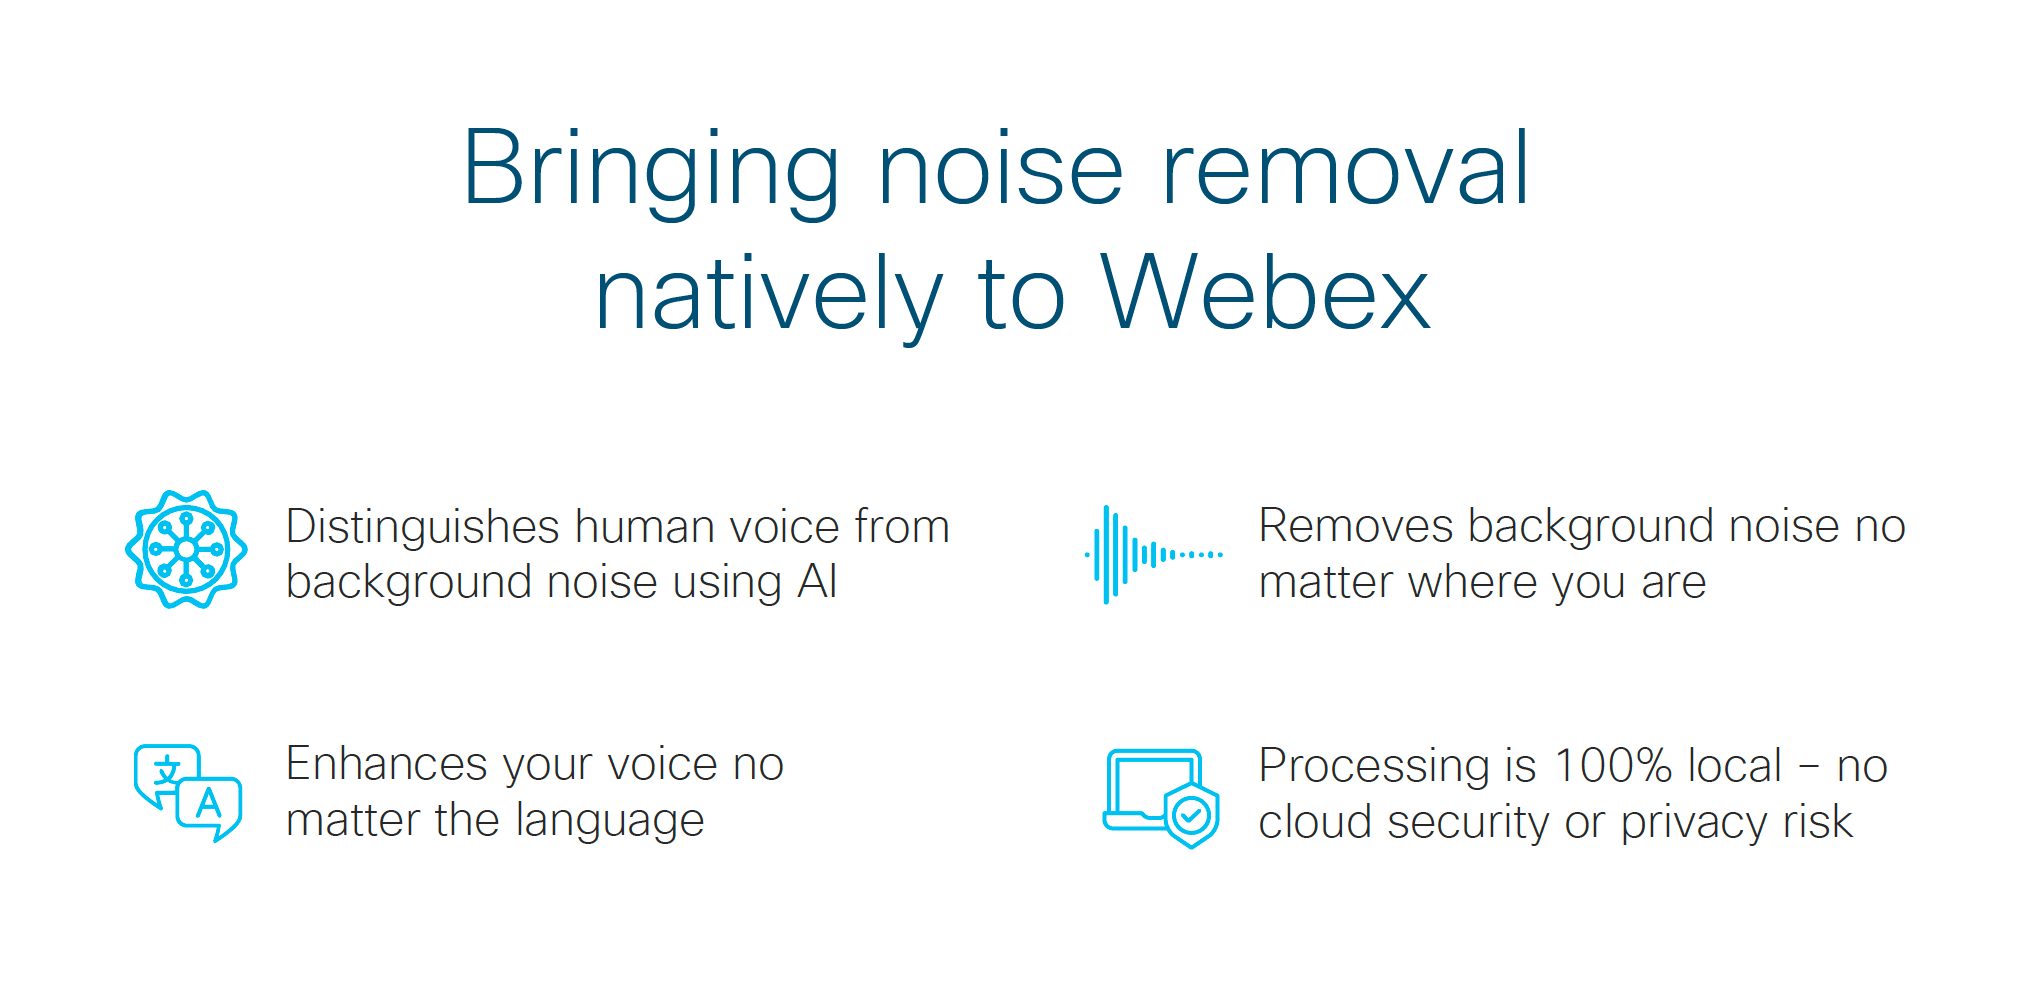 Bringing noise removal natively to Webex